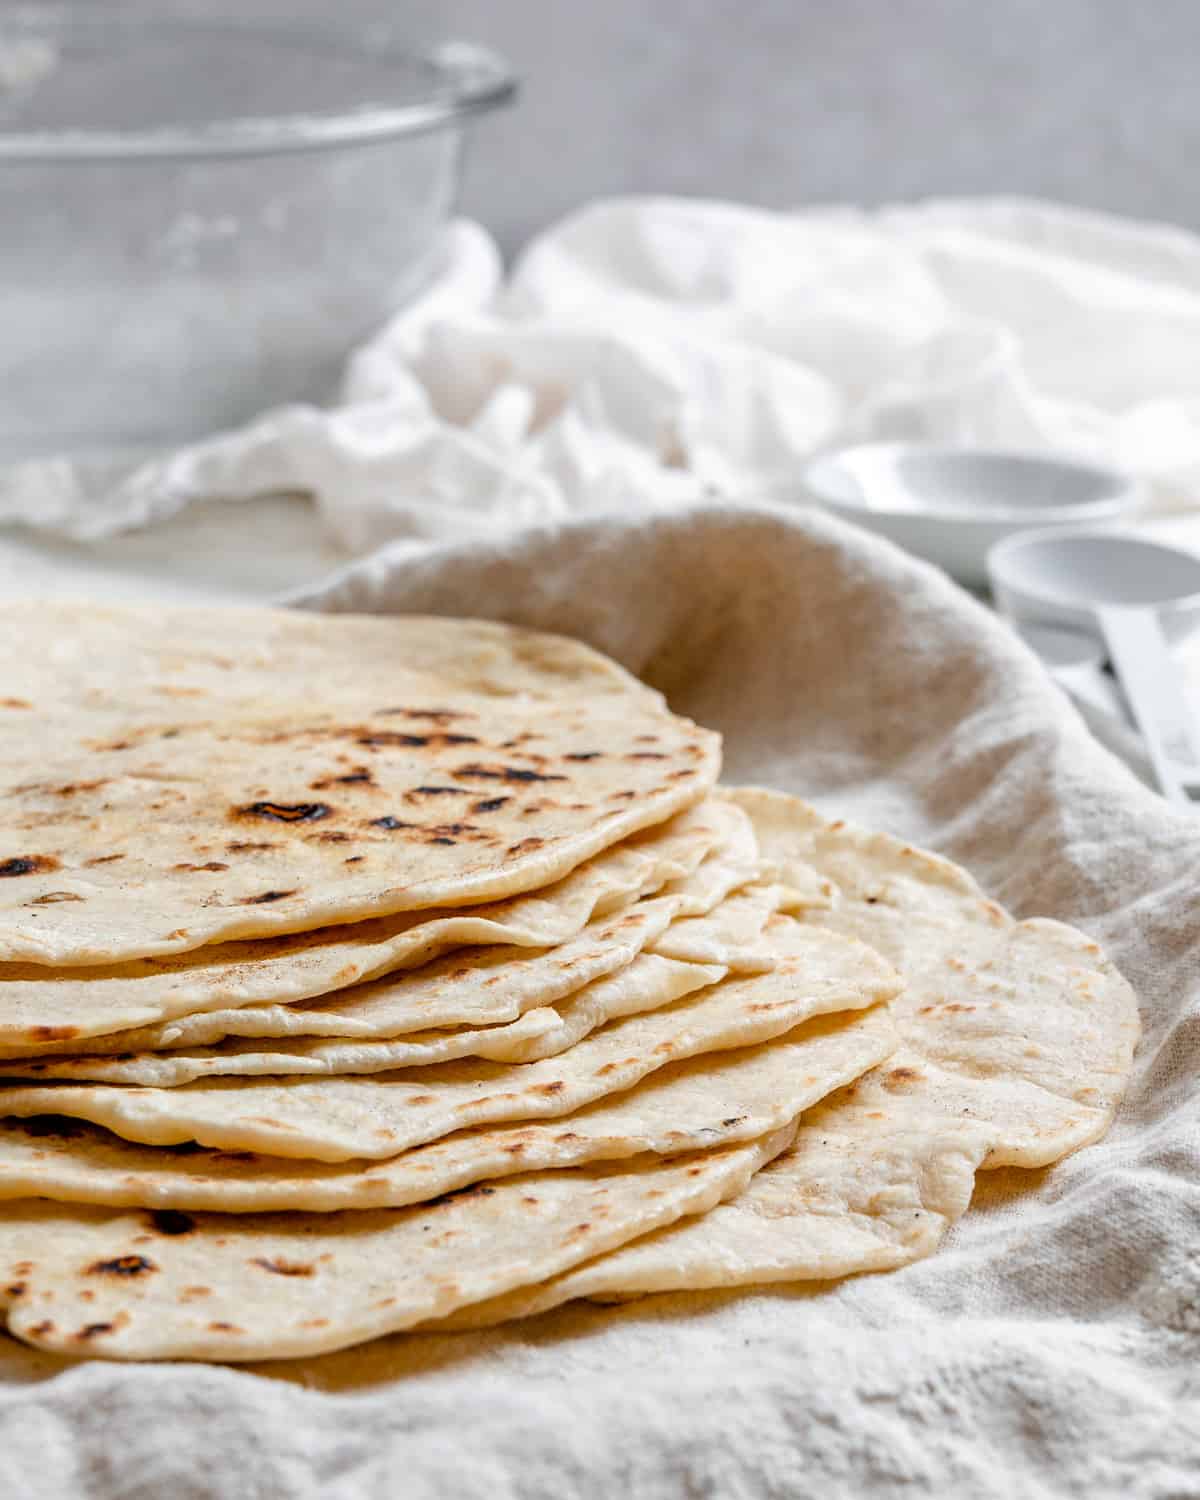 completed Tortillas de Harina – Handmade Flour Tortillas stacked on one another a،nst a white surface